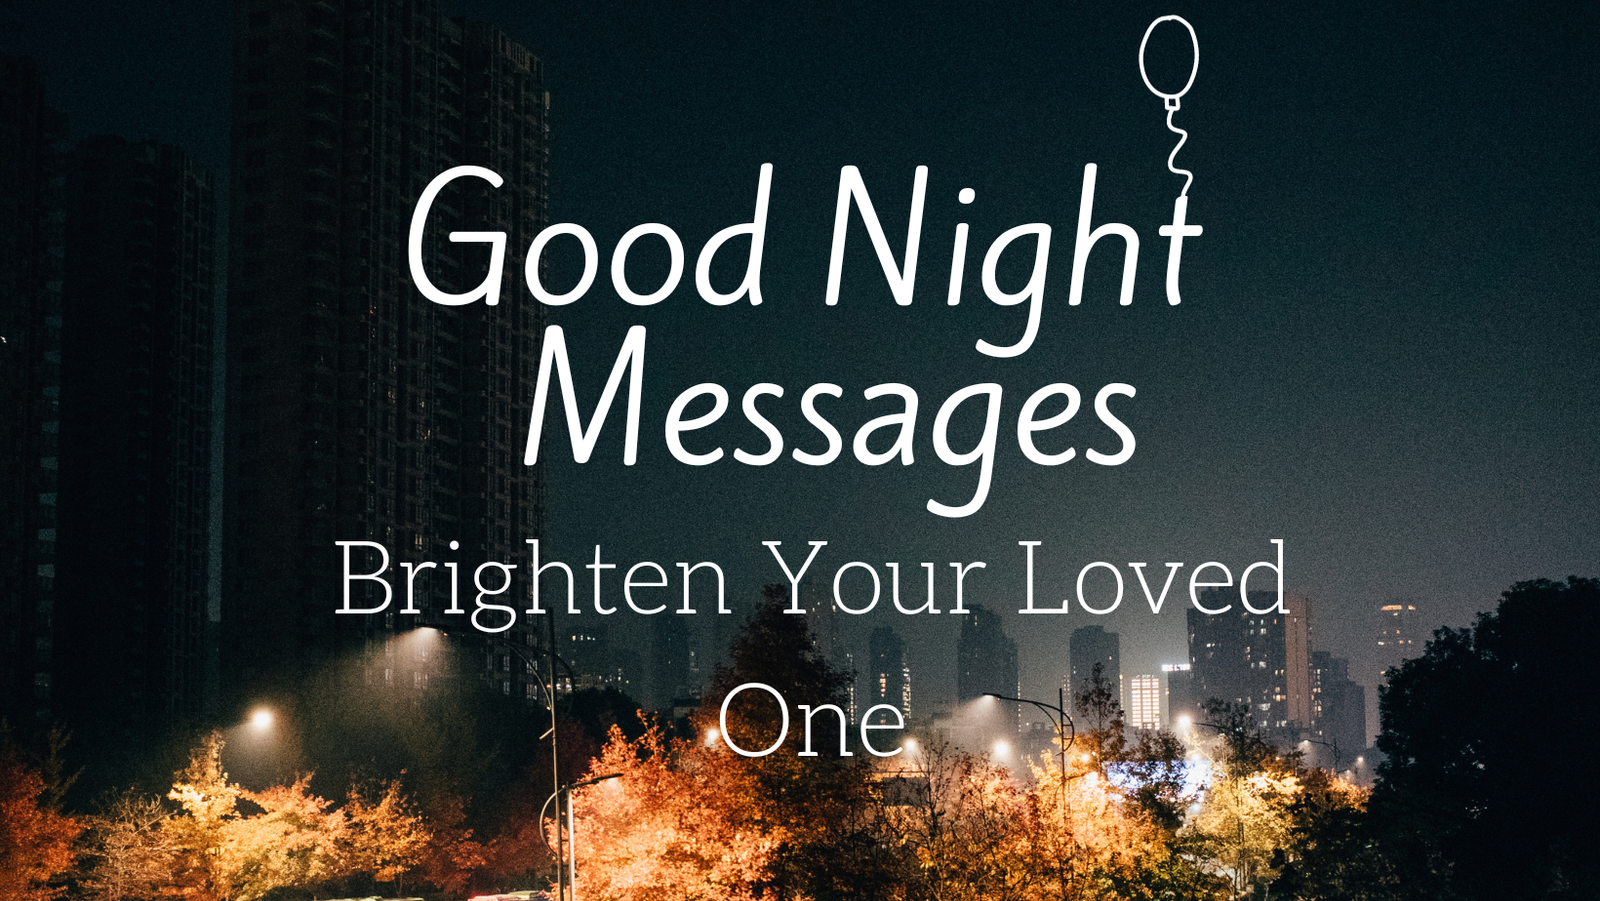 10 Heartfelt Good Night Messages to Brighten Your Loved One